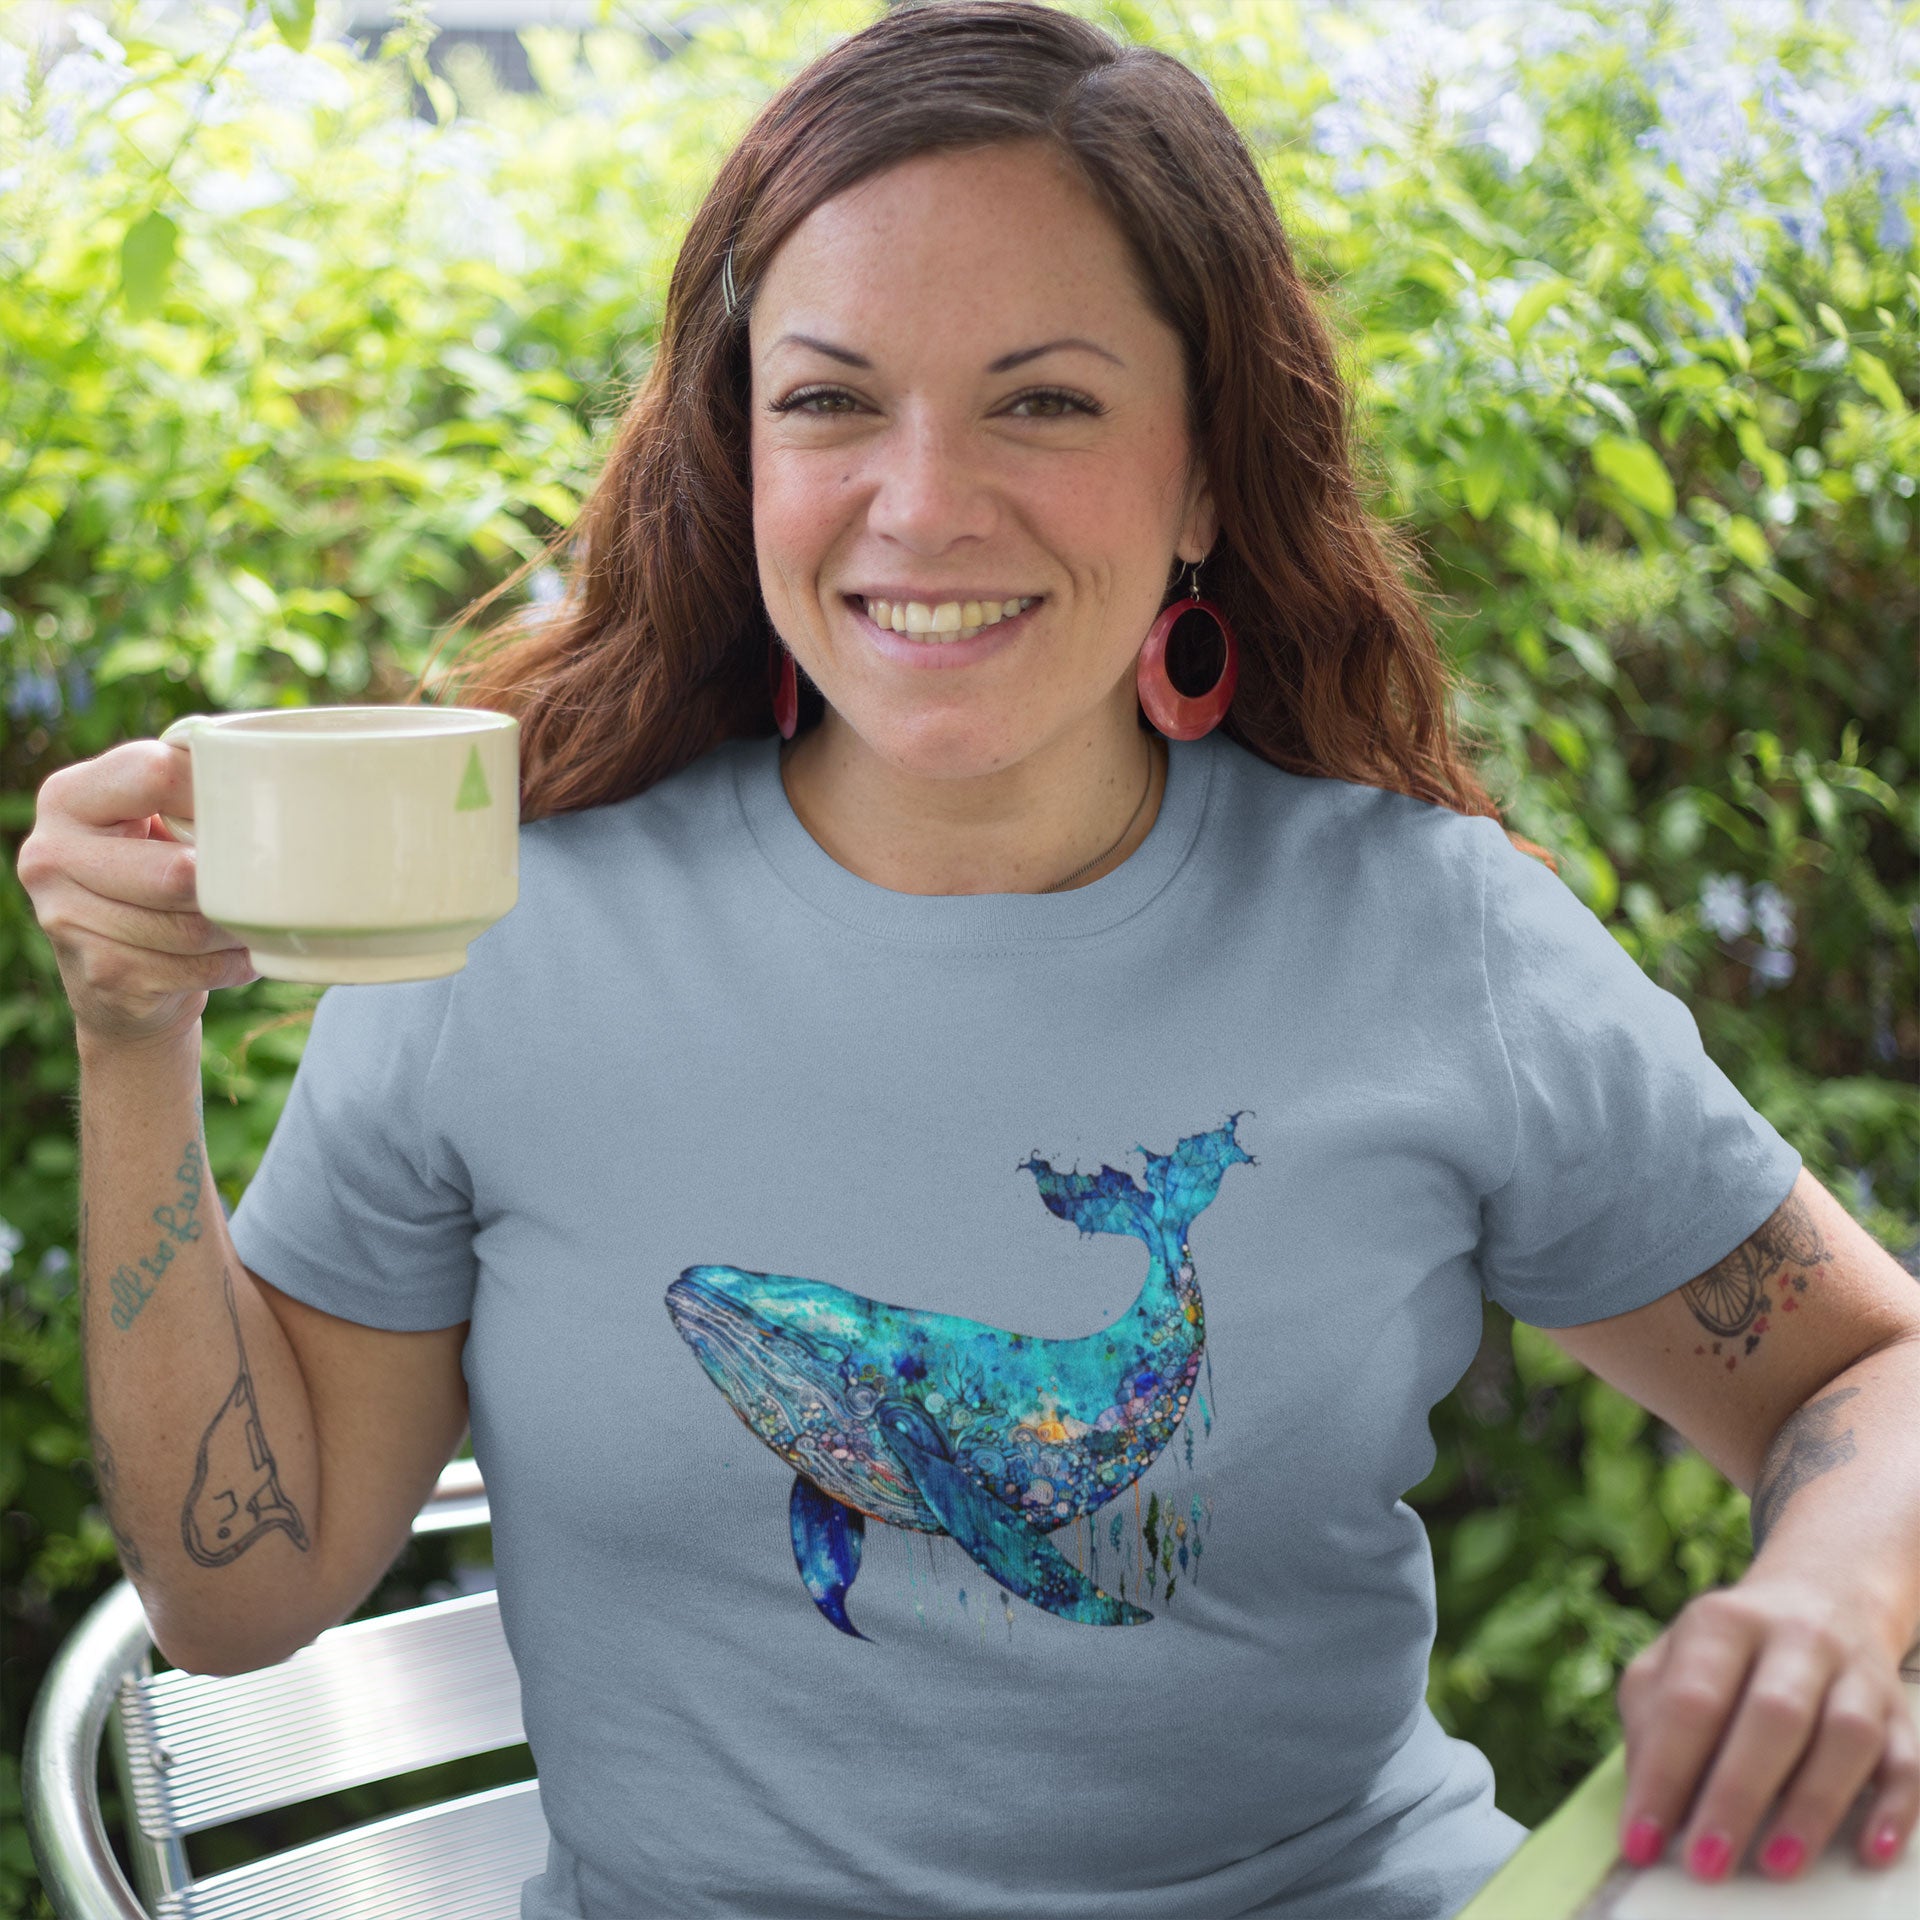 woman drinking coffee wearing a light blue t-shirt with a blue whale print